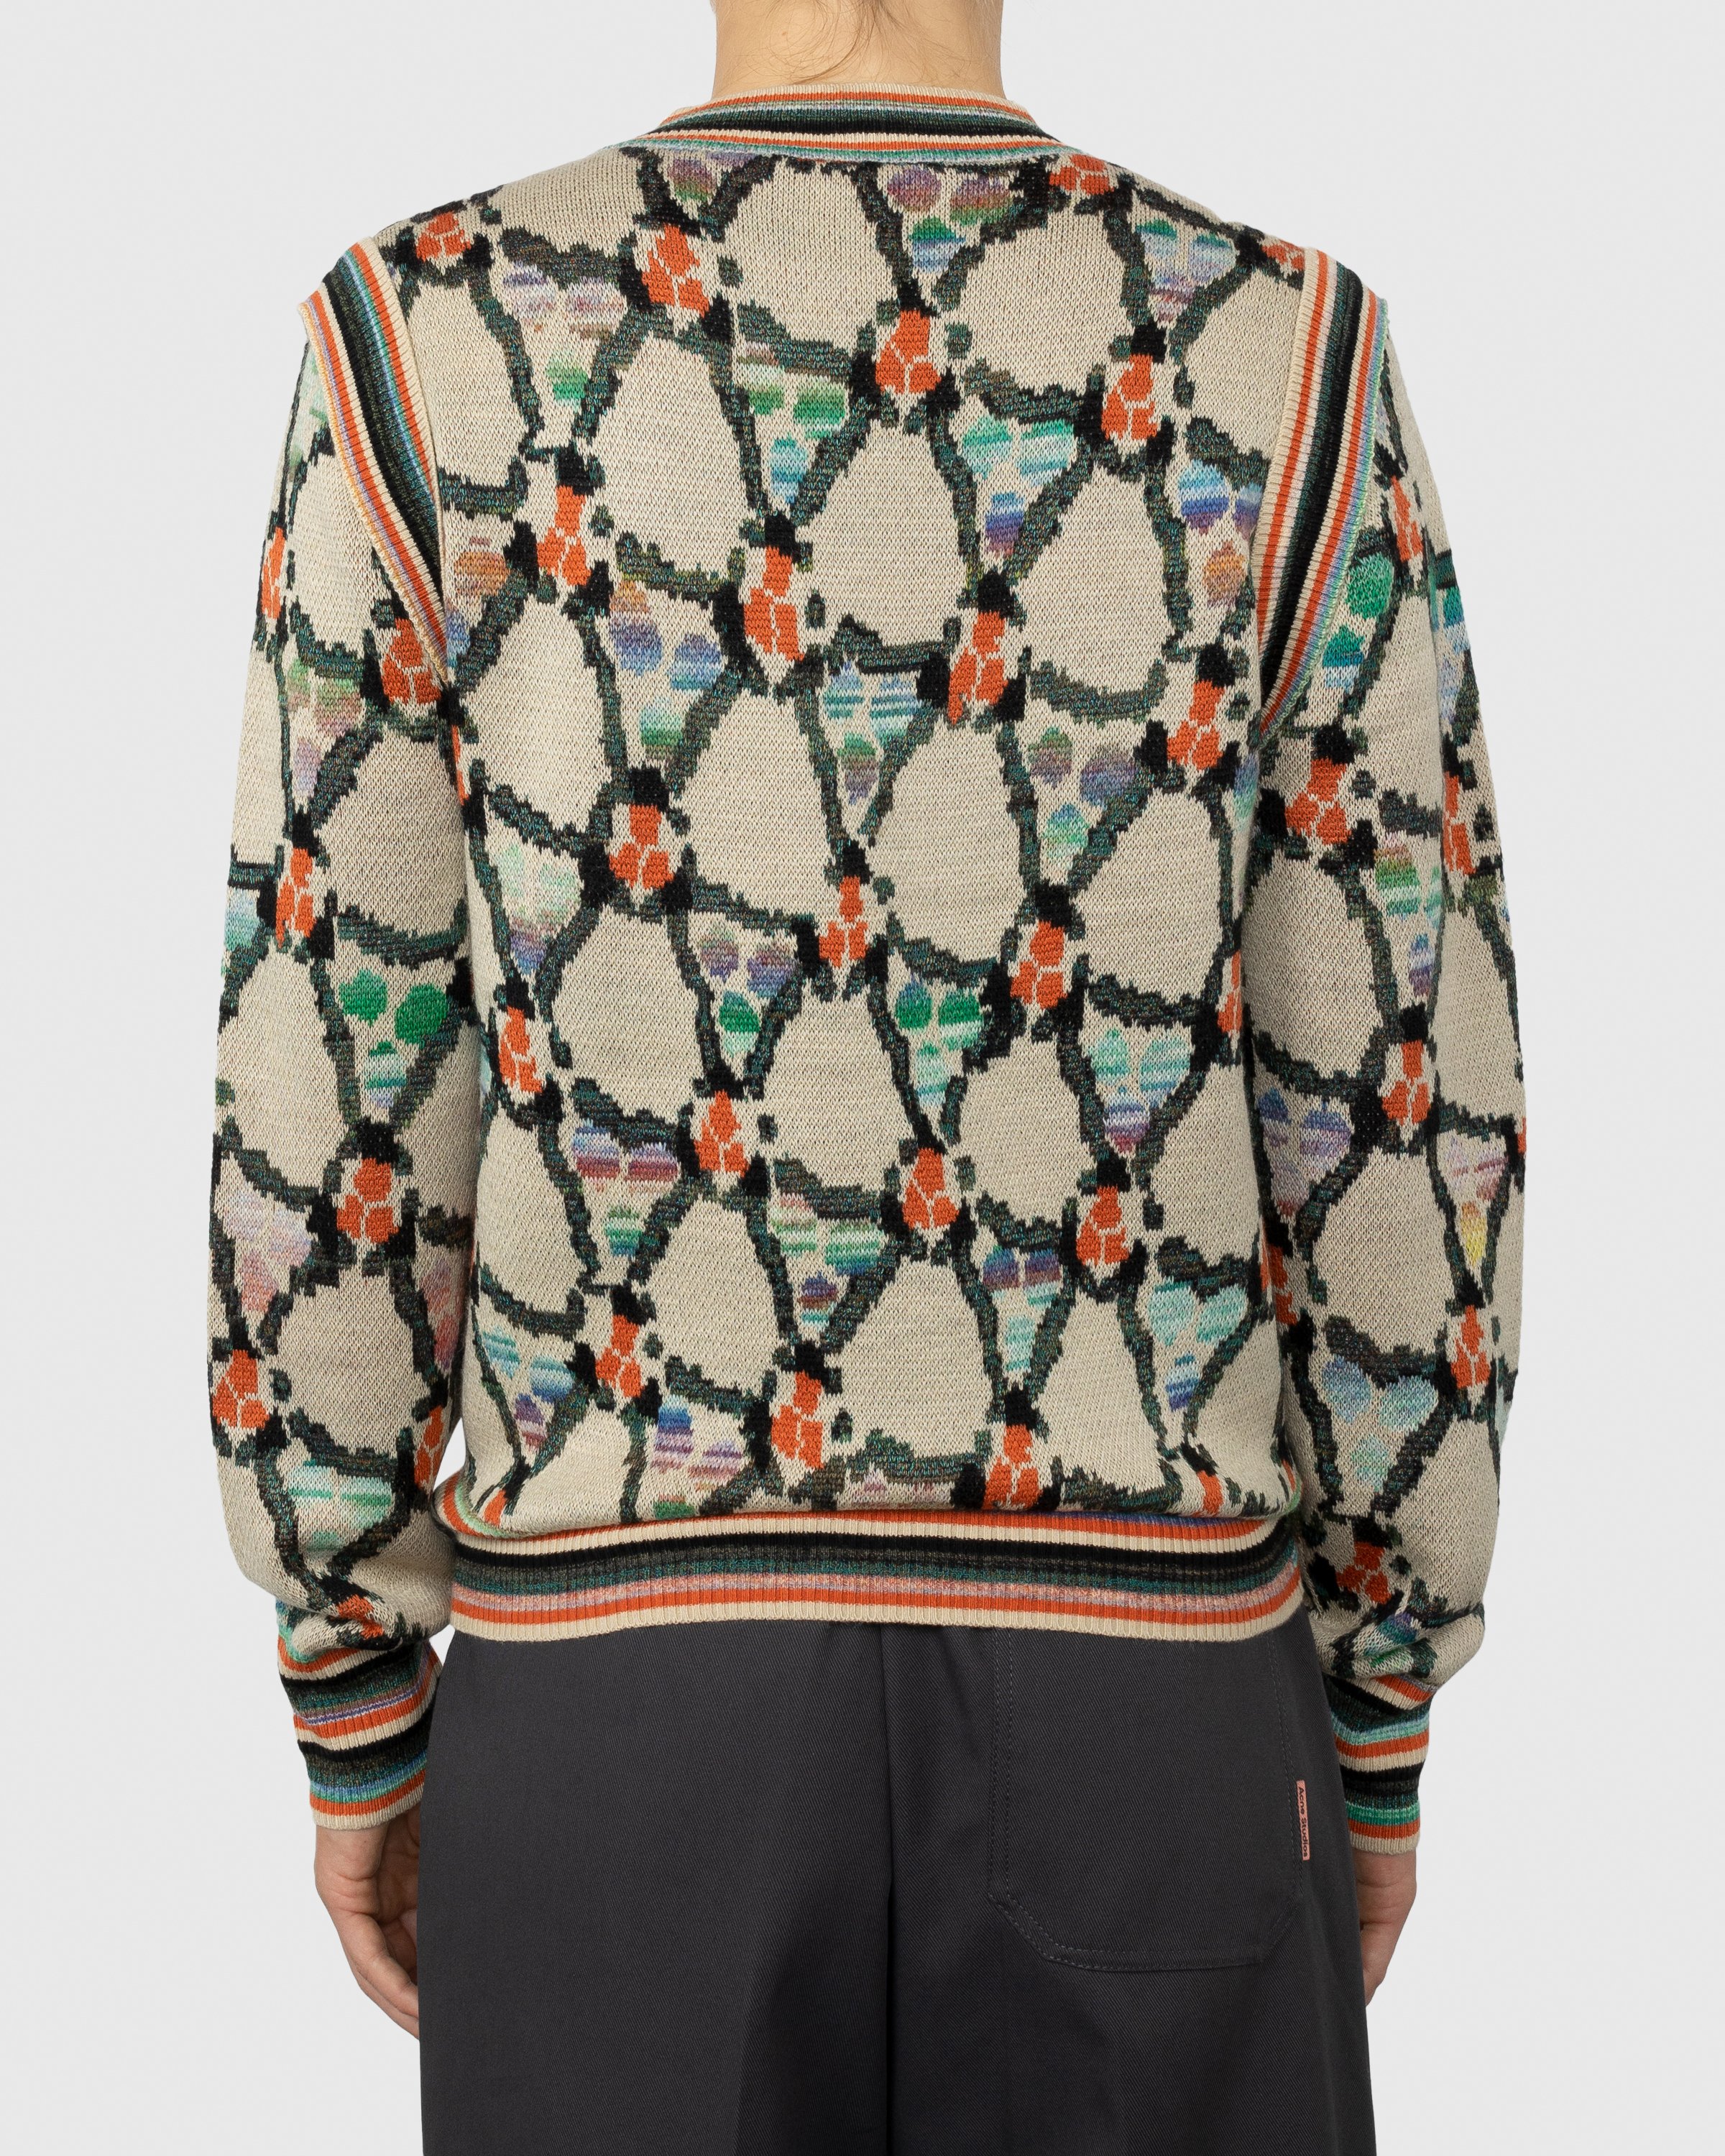 Acne Studios - Wrapped Sweater Beige - Clothing - Multi - Image 4